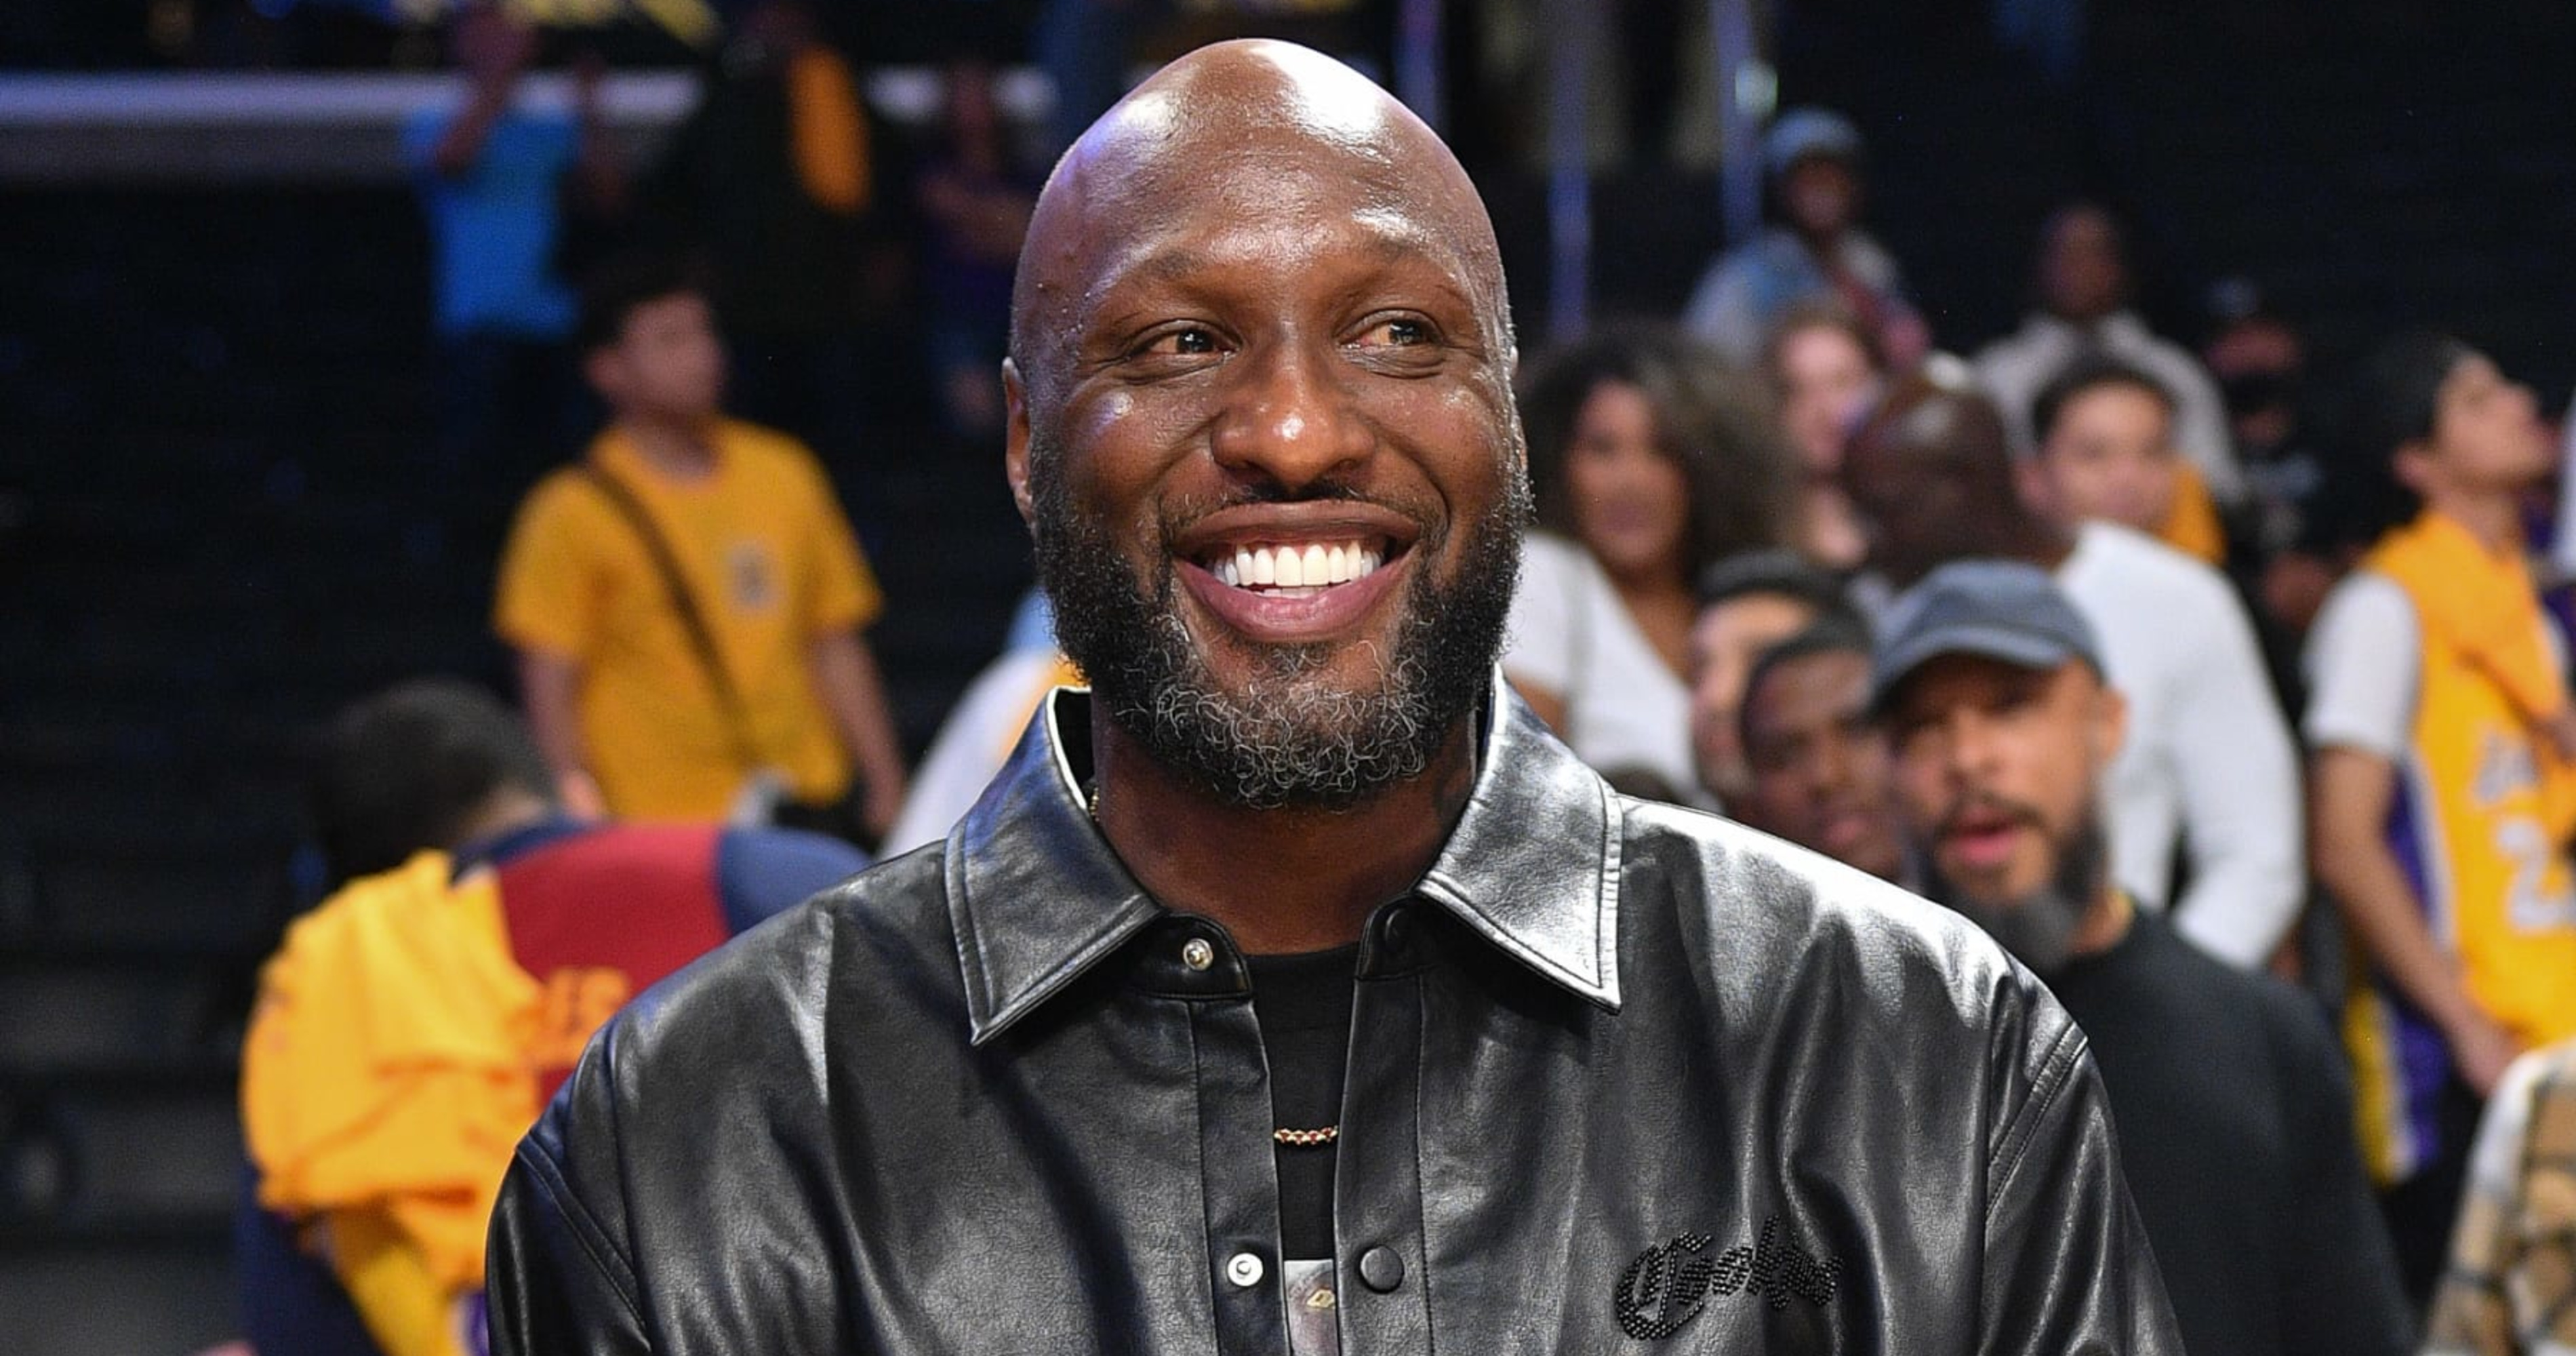 Lamar Odom pawned his championship rings. Now they're on auction for  $100,000